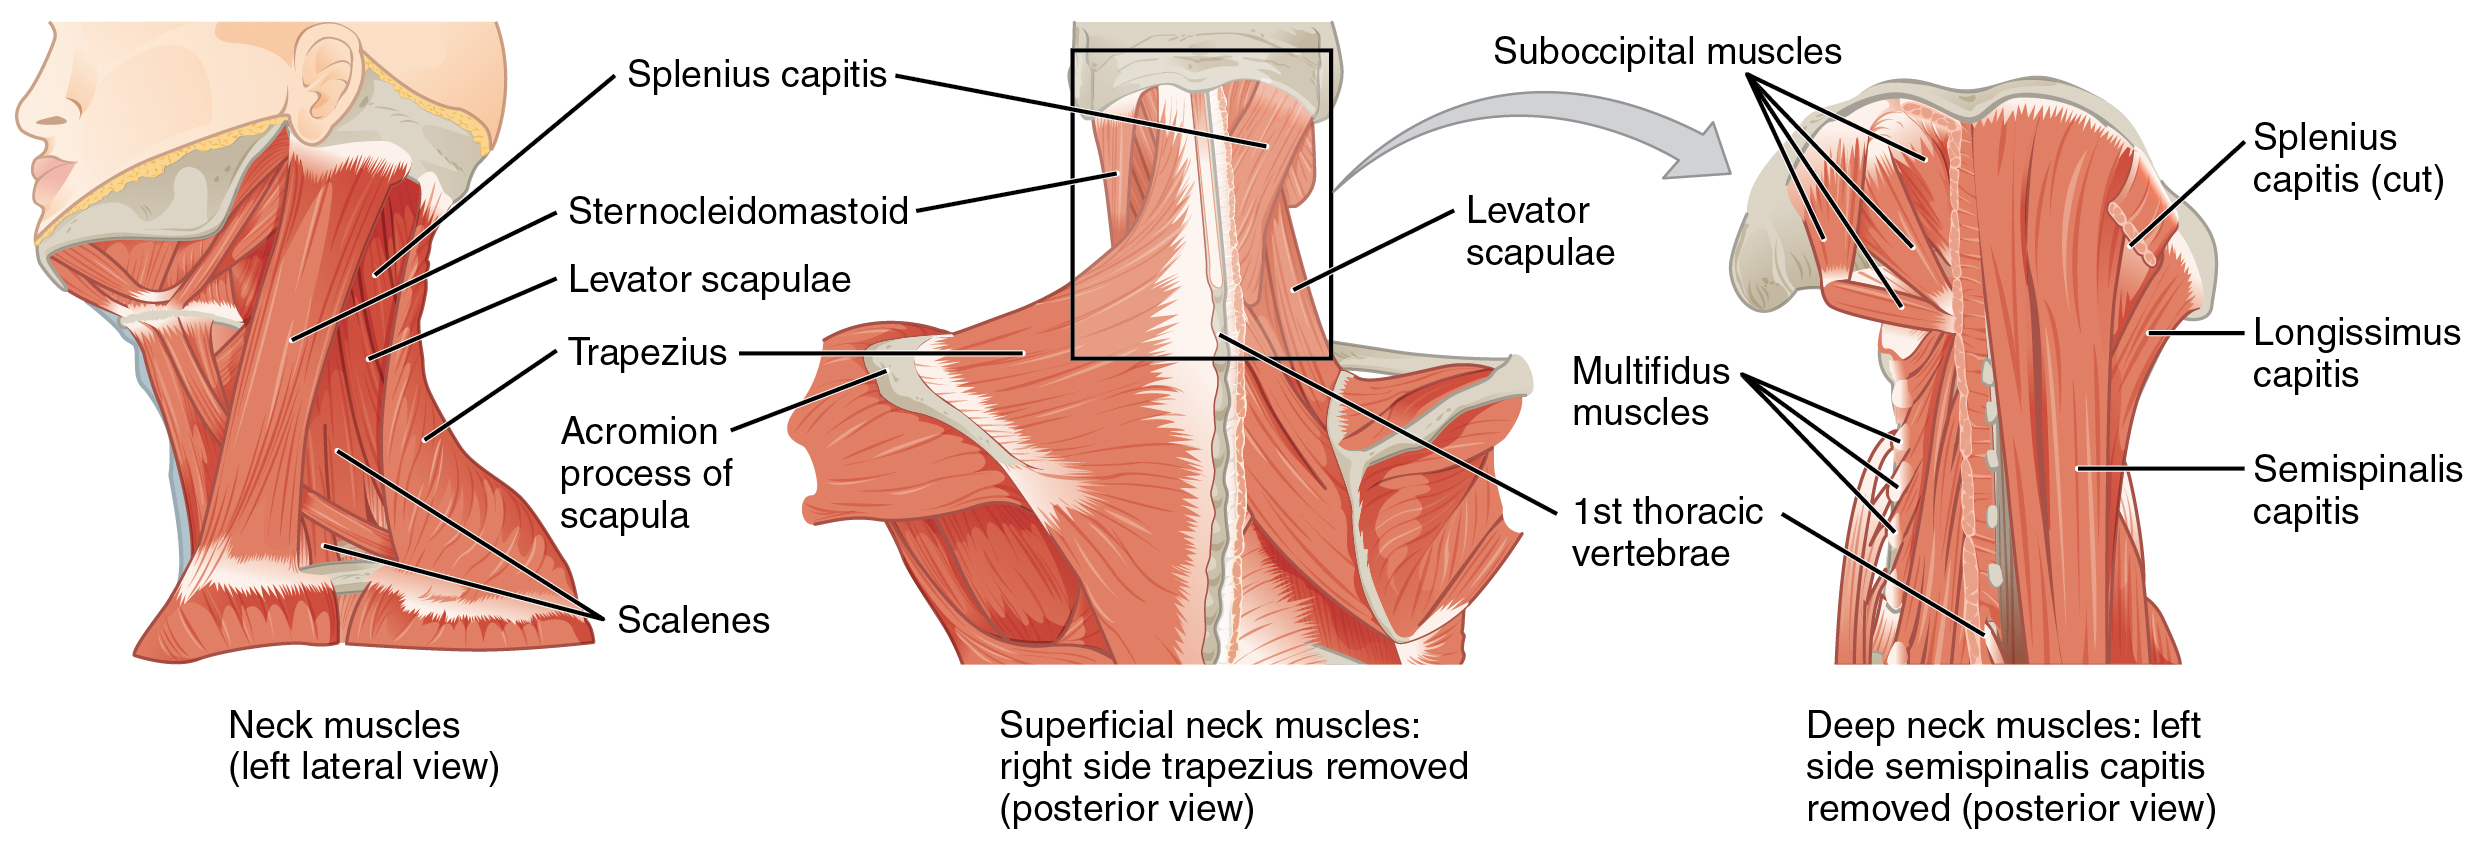 Back Muscles Diagram 113 Axial Muscles Of The Head Neck And Back Anatomy And Physiology